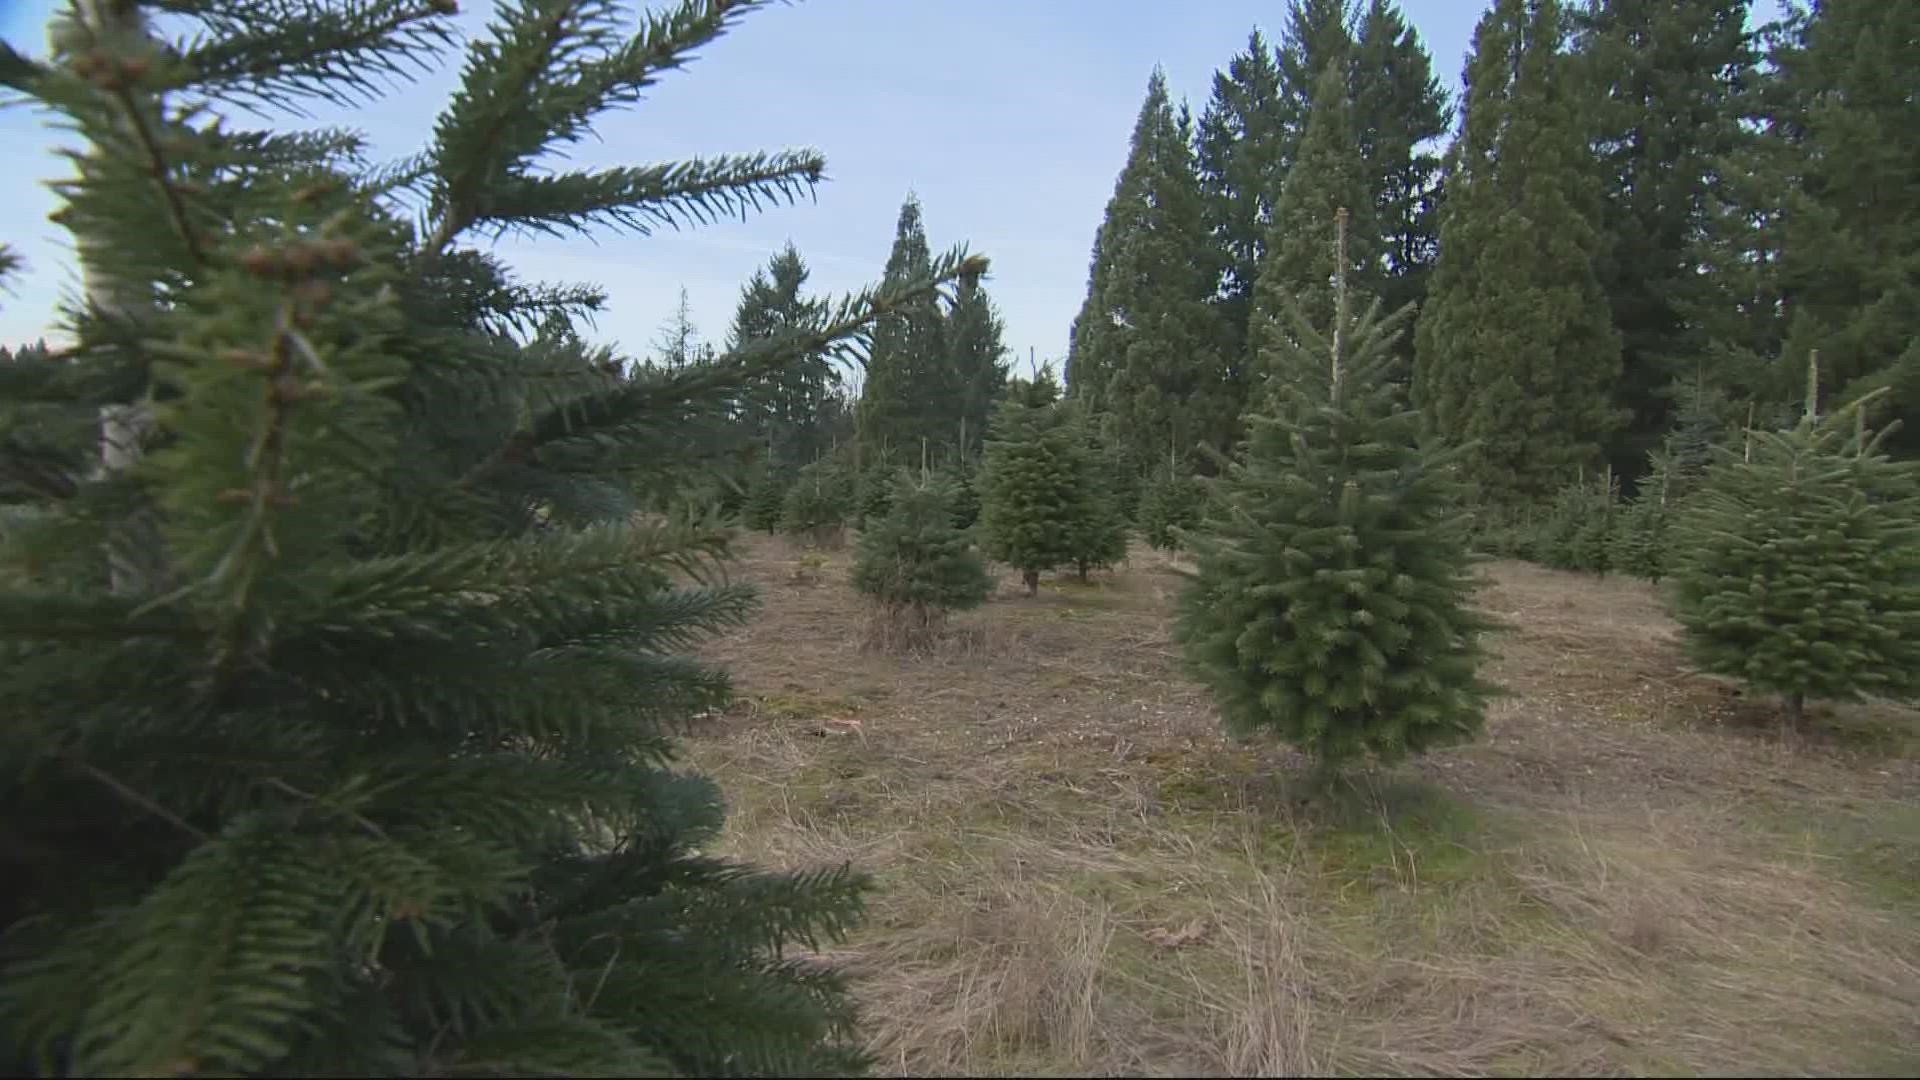 Oregon Christmas Tree Farms said there's no tree shortages, but Oregonians can expect to pay about $2 more per foot.